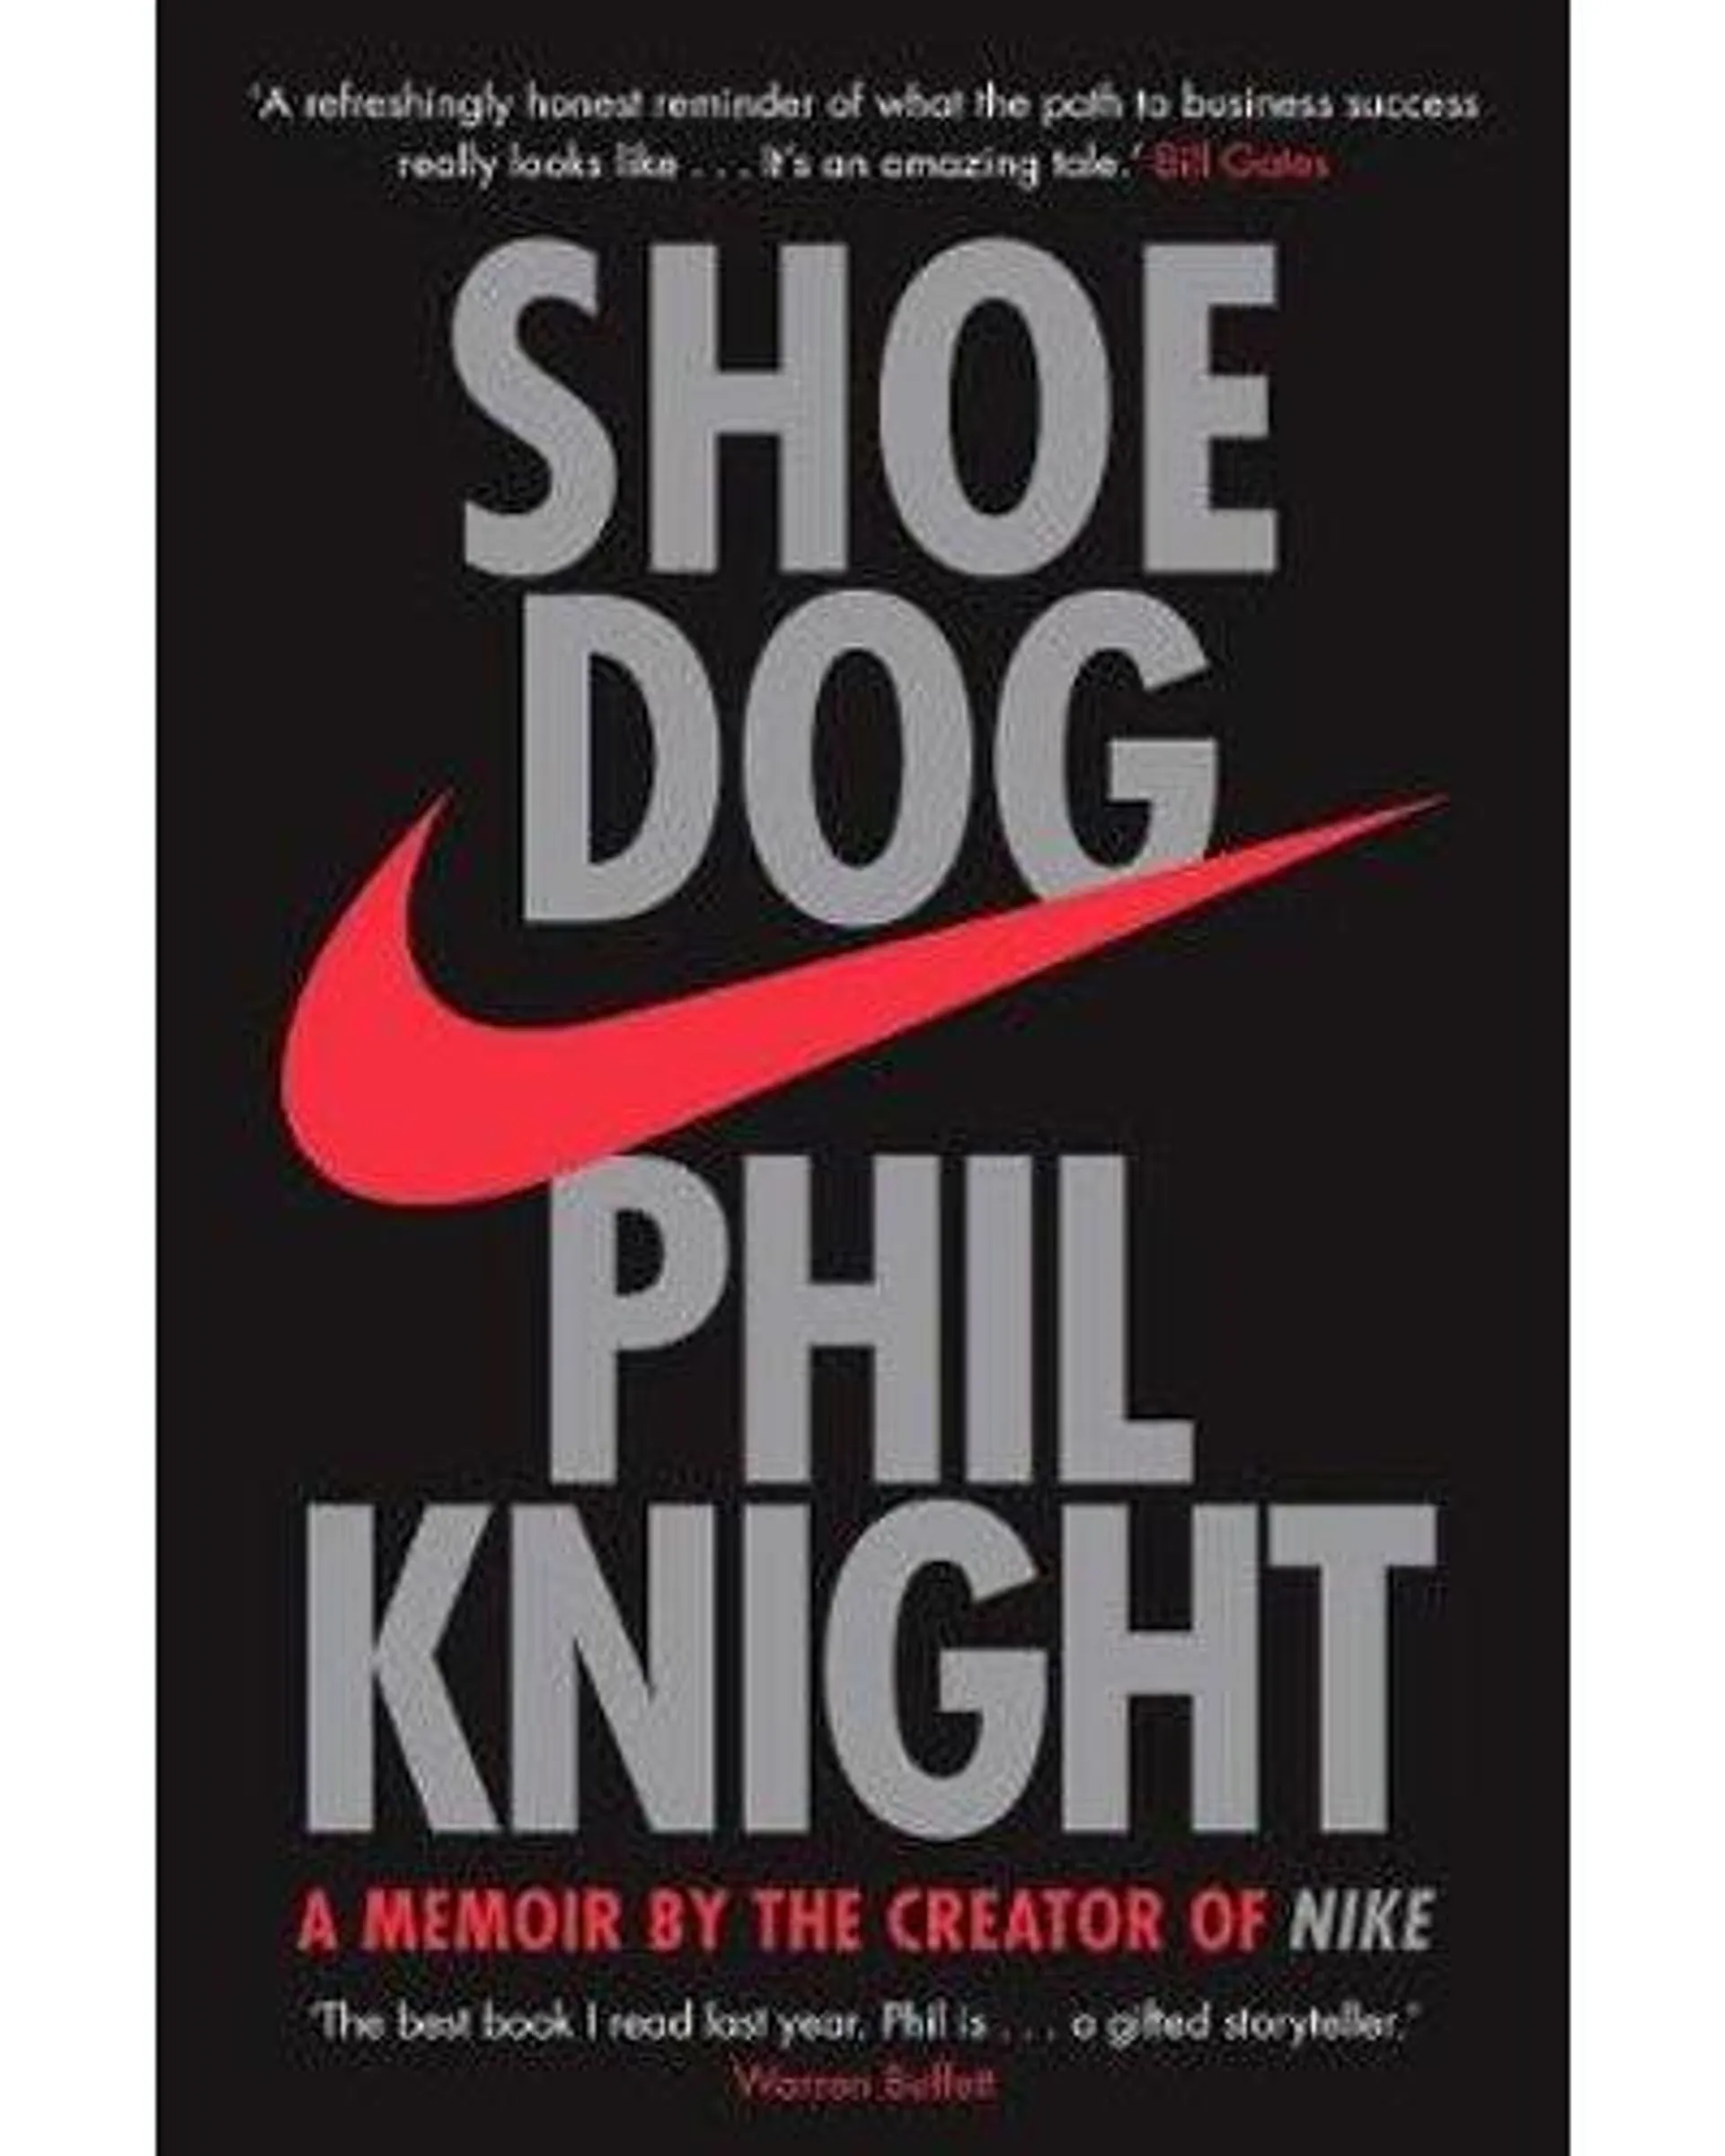 Shoe Dog - A Memoir by the Creator of NIKE (Paperback)